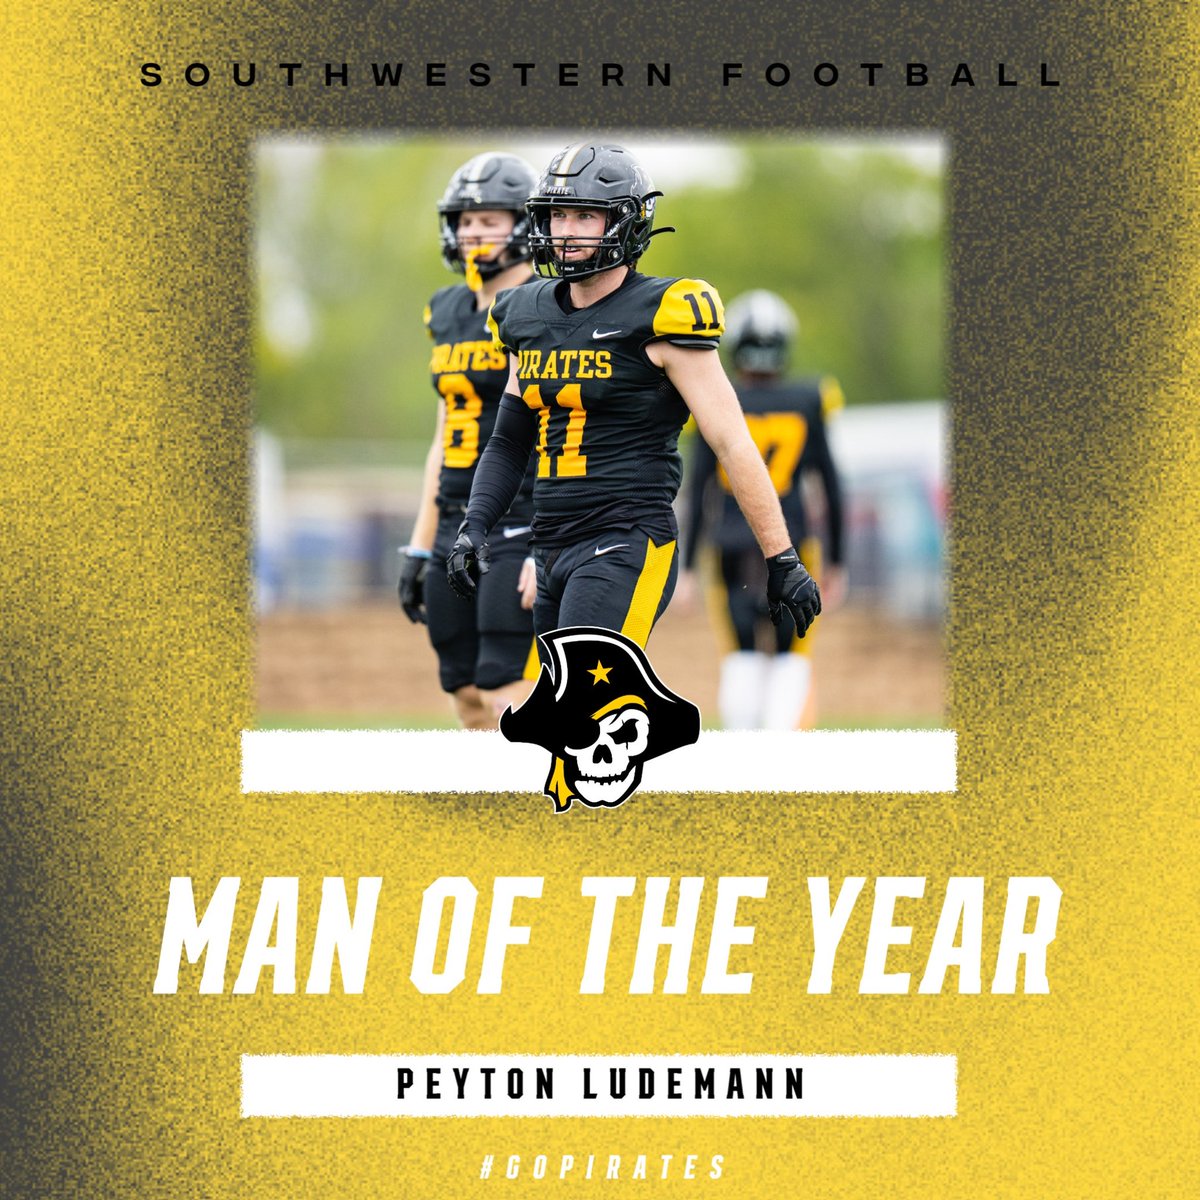 And last but certainly not least. The 2023 Southwestern Football Man of the Year…Peyton Ludemann! 🏴‍☠️ 🏈